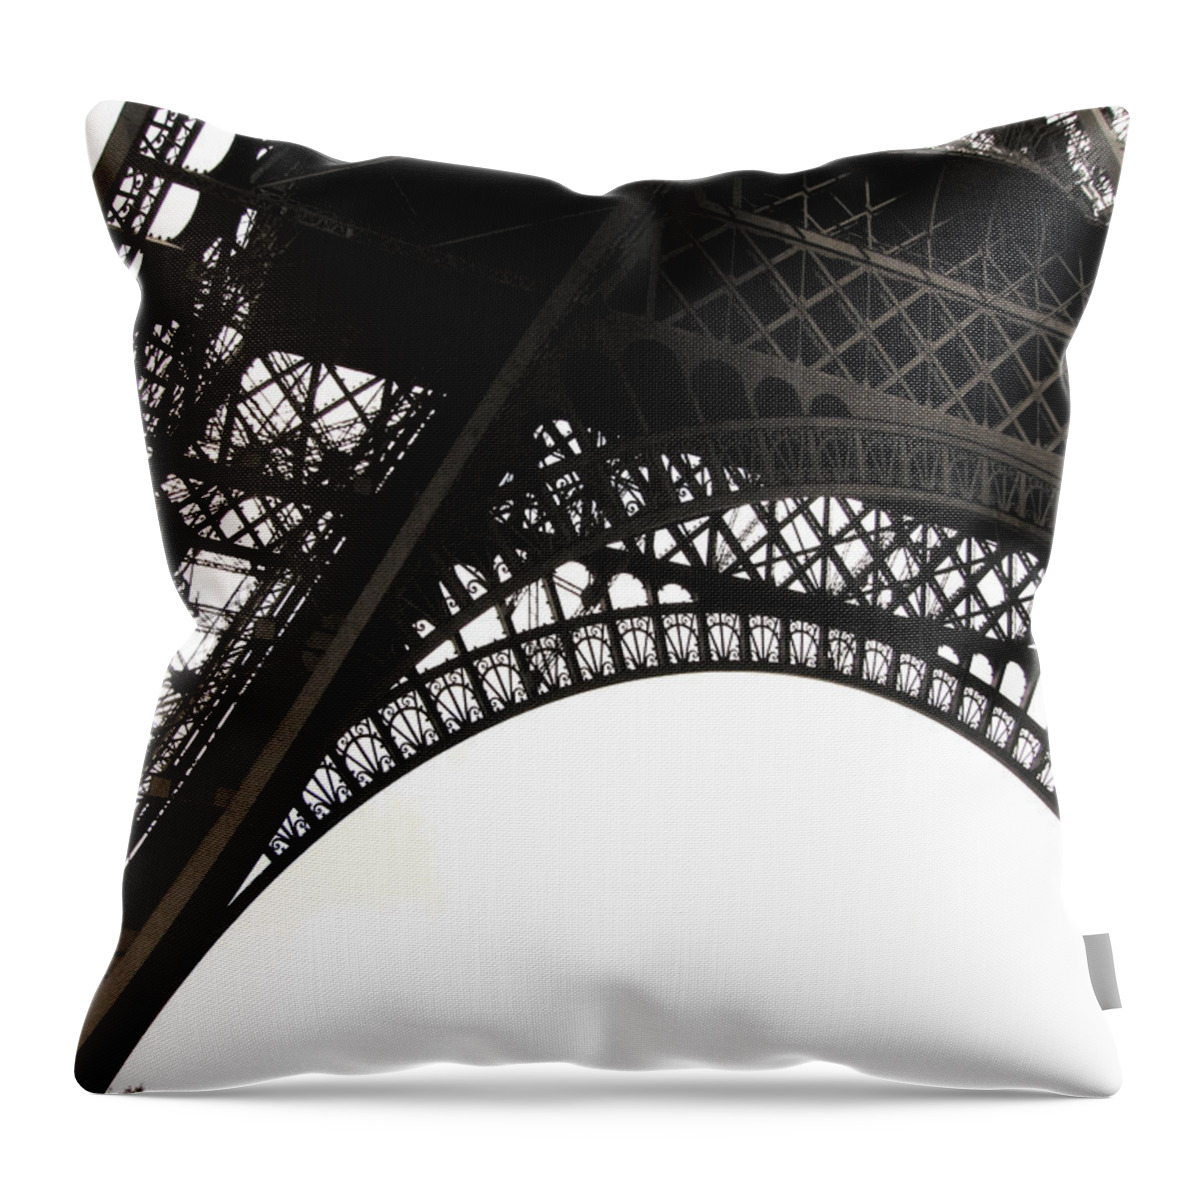 Eiffel Tower Throw Pillow featuring the photograph Eiffel Tower by Fion Ngan @ Fill In My Blanks